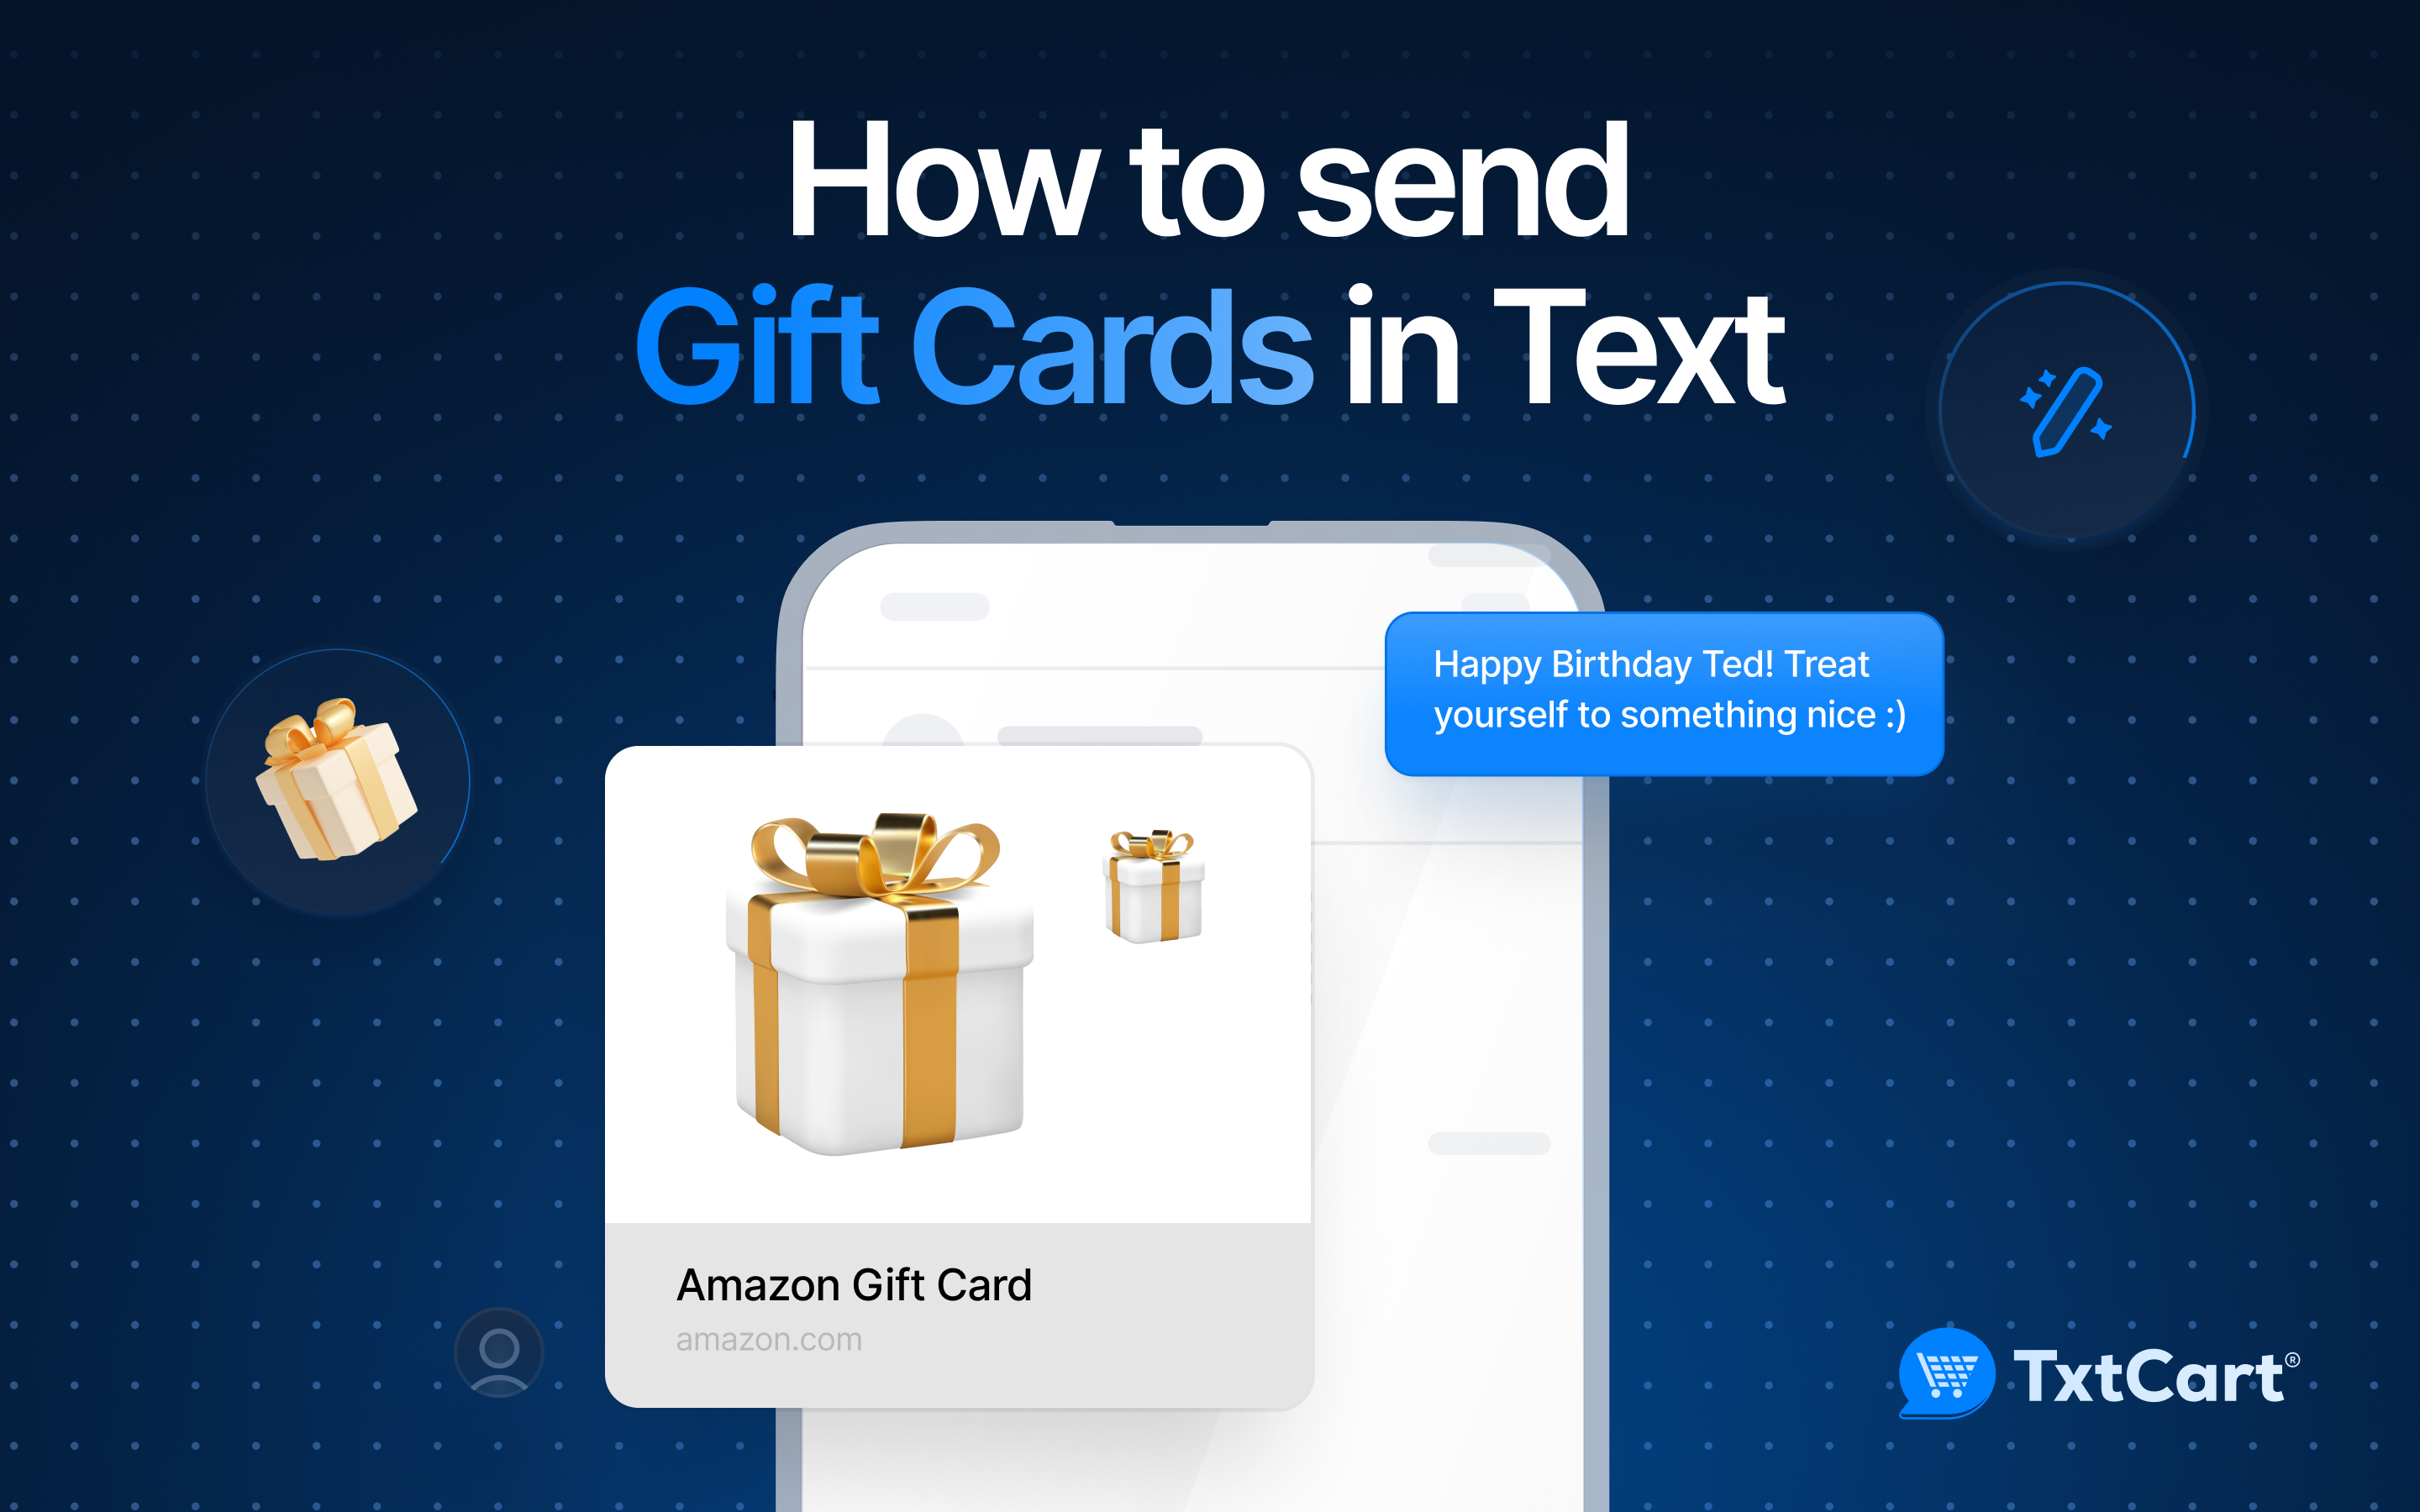 How to send Gift Cards in Text